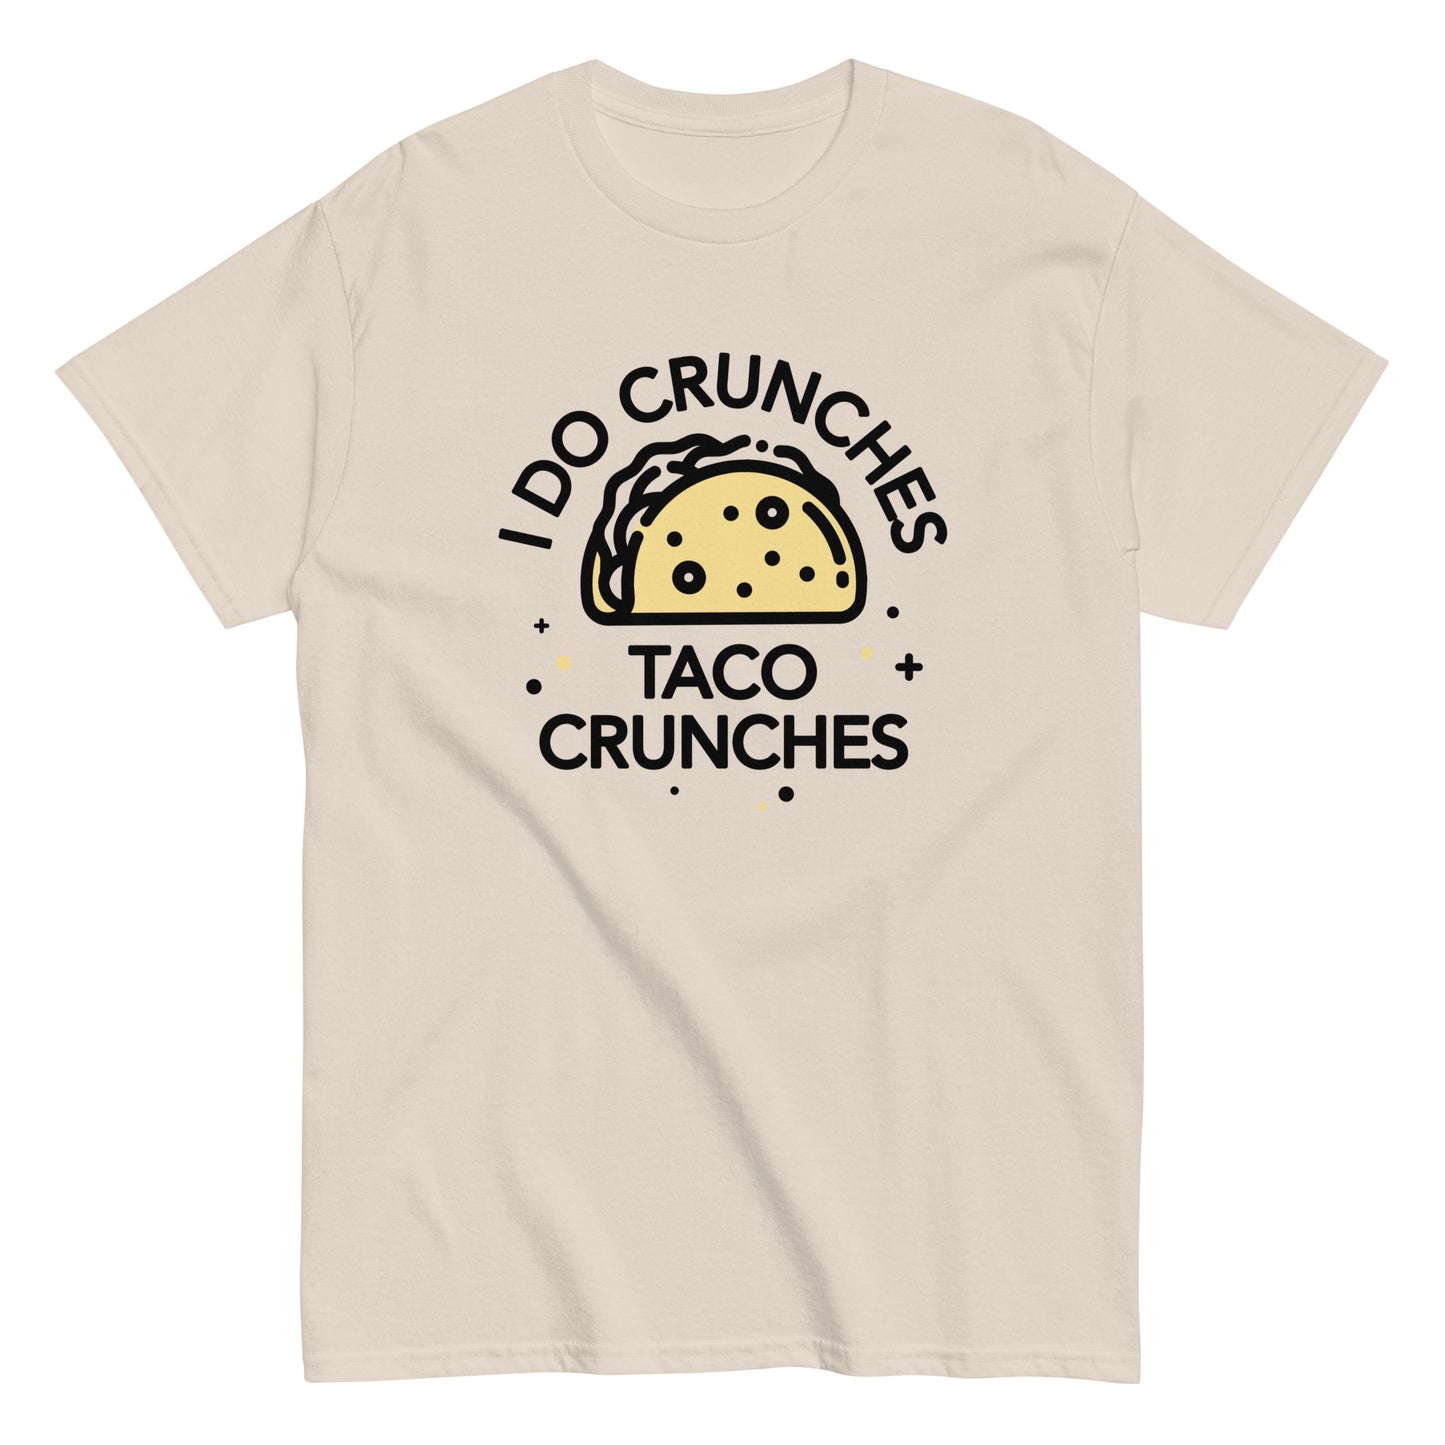 I Do Crunches Taco Crunches Men's Classic Tee